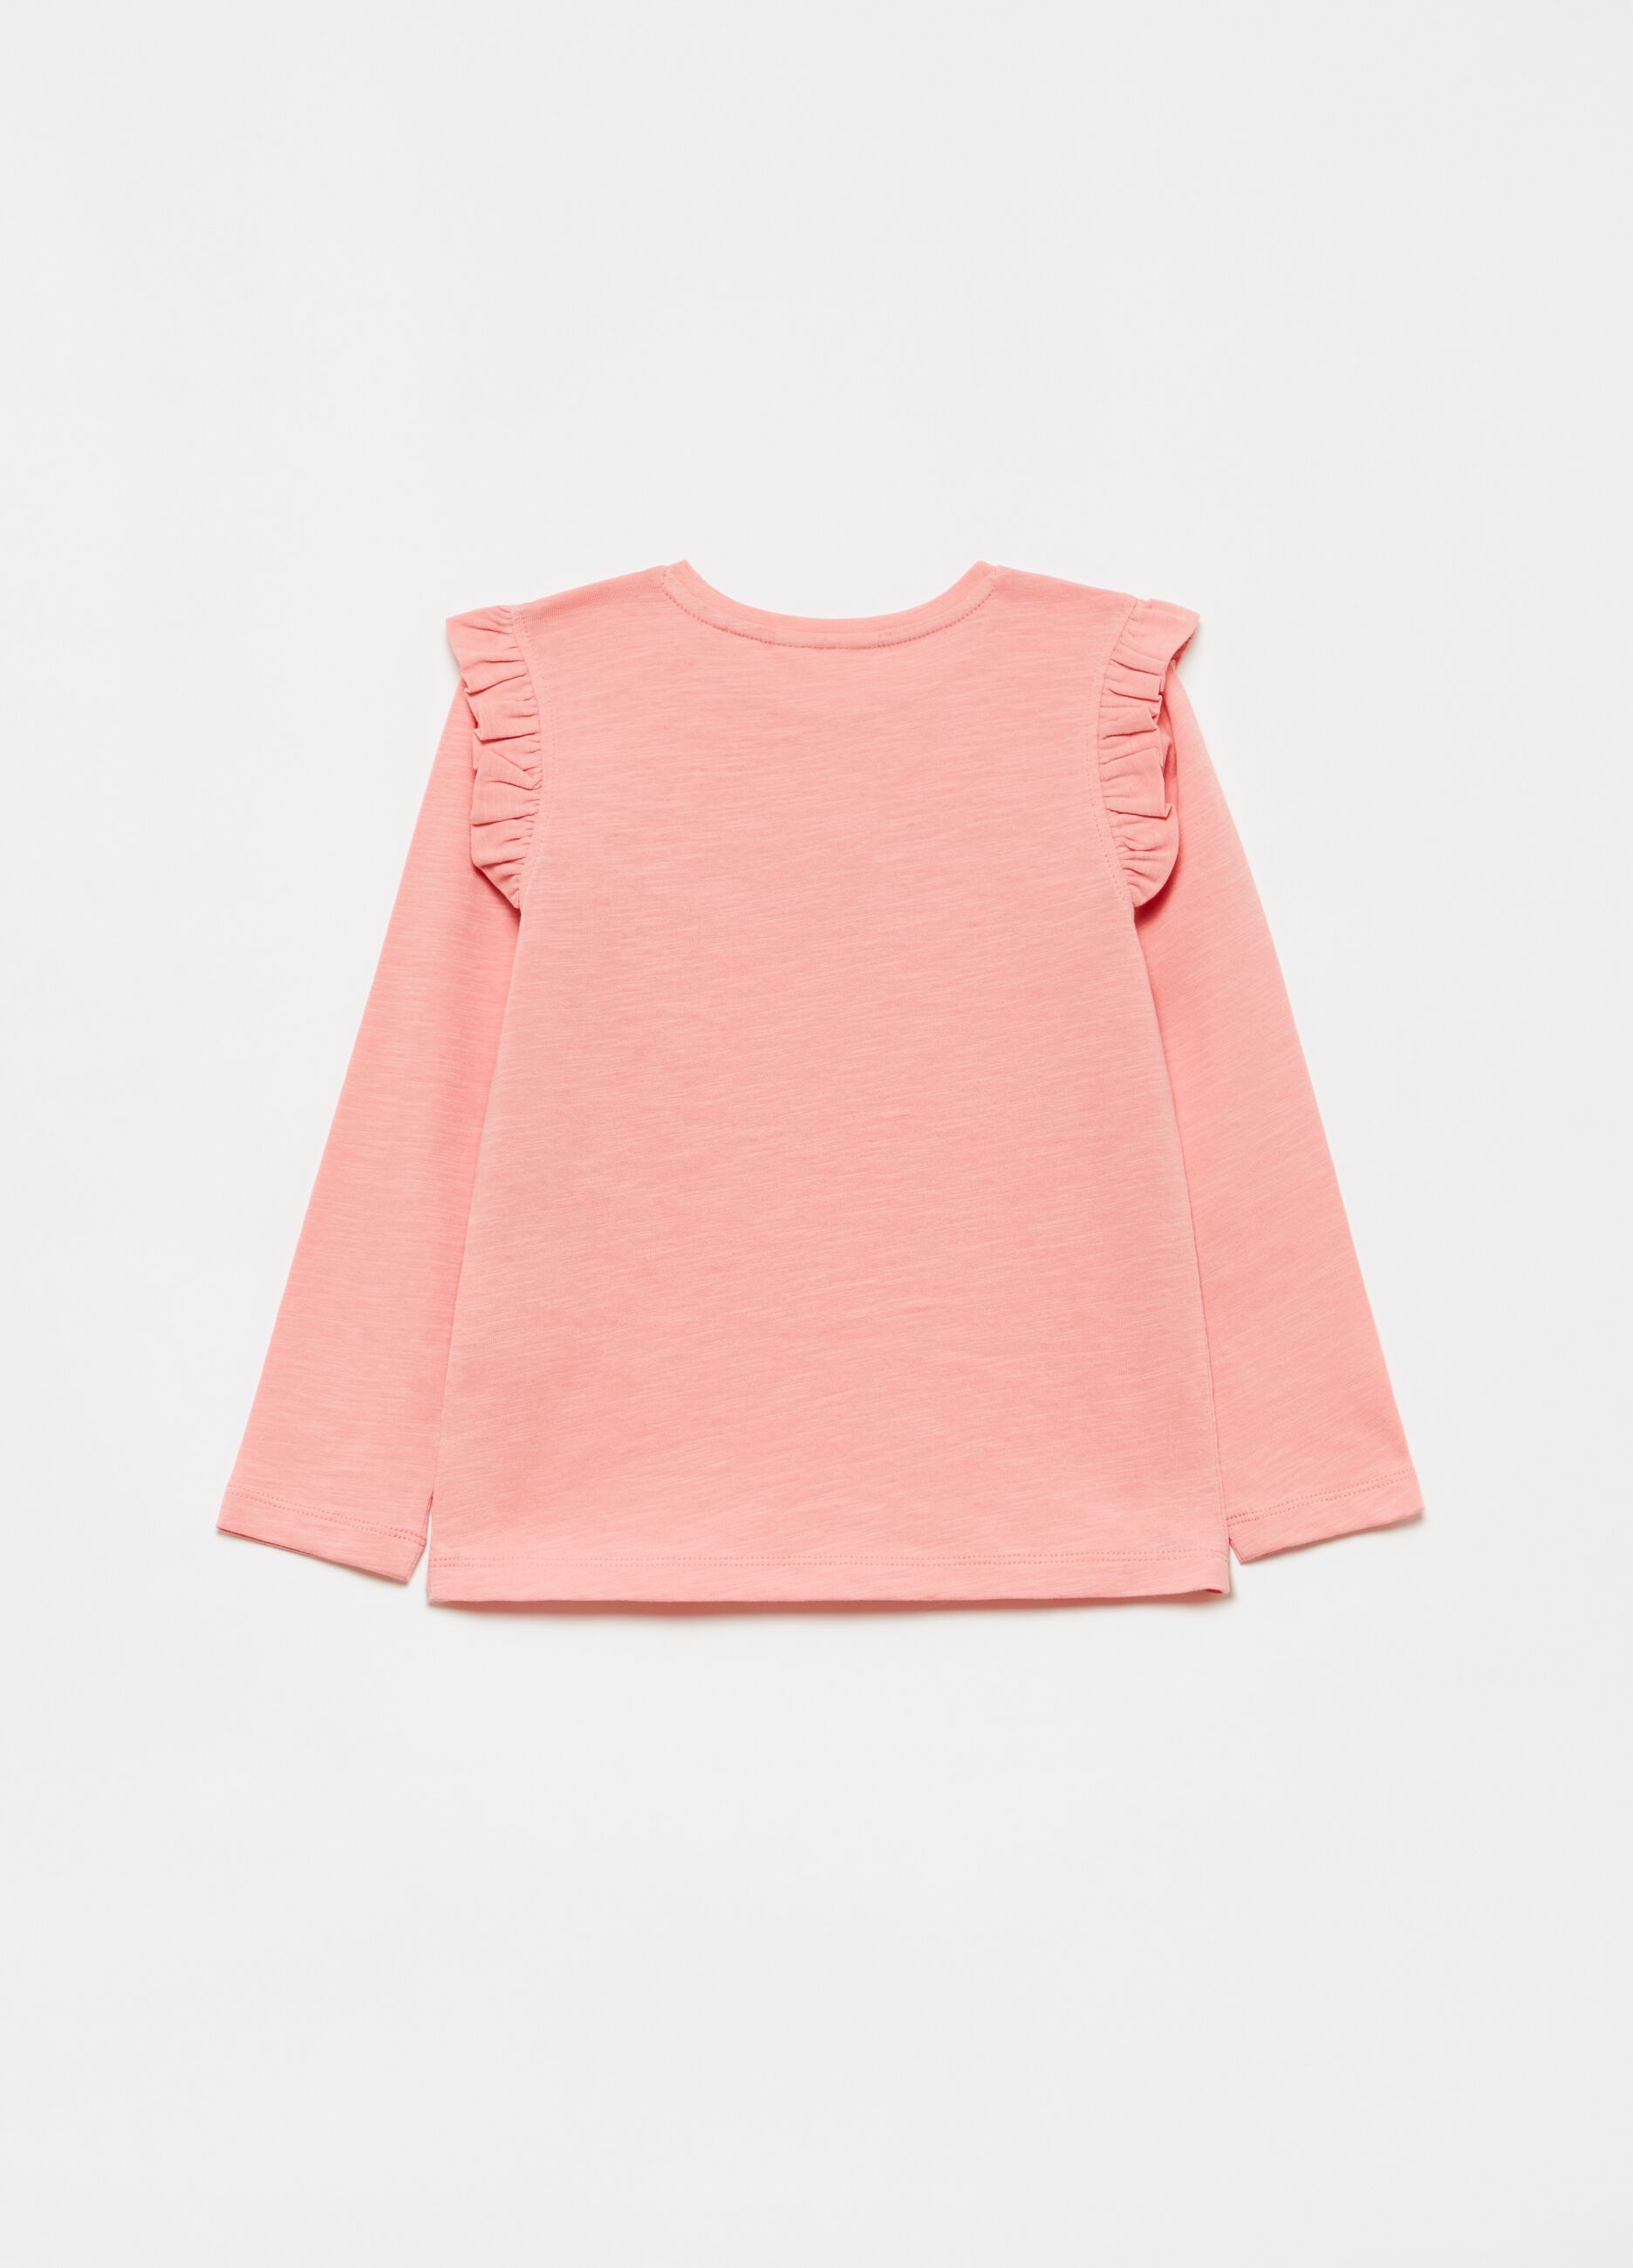 T-shirt in 100% cotton with frills